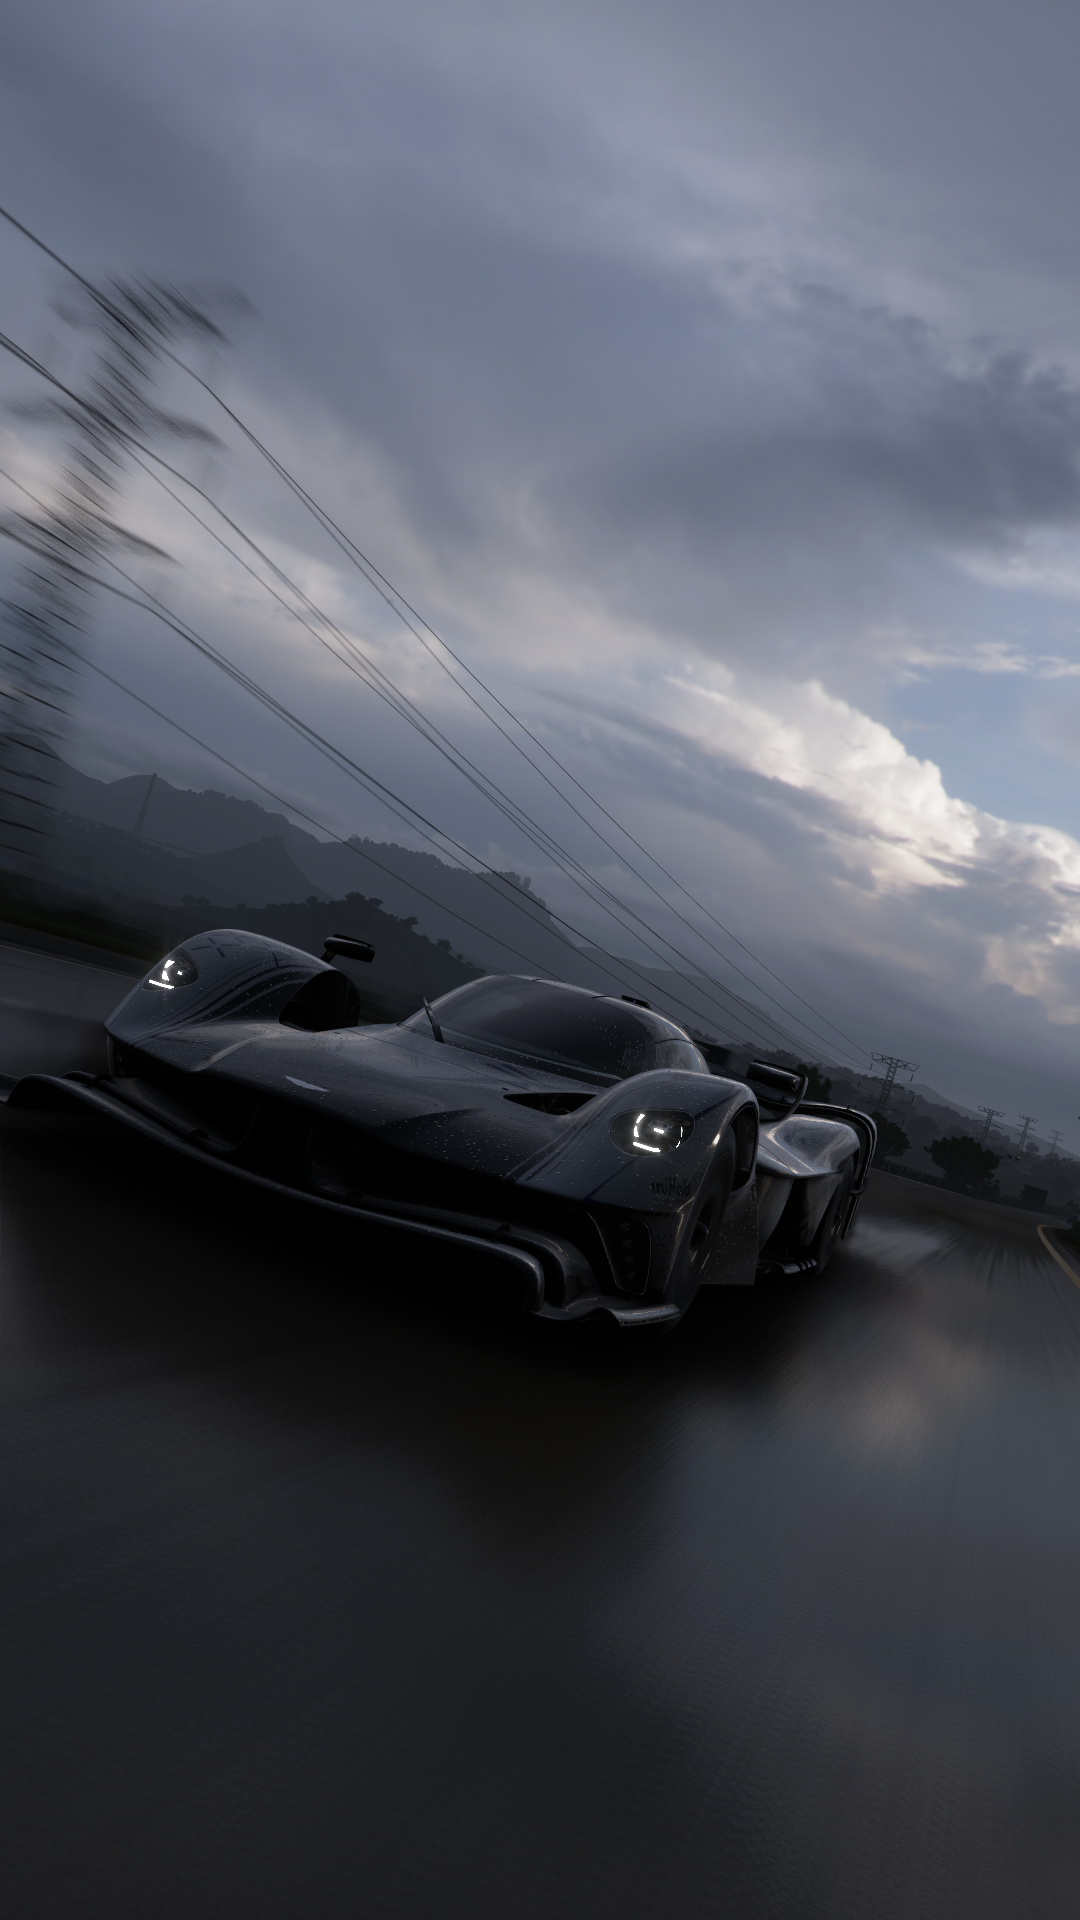 General 1080x1920 Forza Forza Horizon 5 Aston Martin AM RB 003 Hypercar British cars Turn 10 Studios V6 engine Xbox Game Studios vehicle car PlaygroundGames Aston Martin screen shot video game art clouds video games headlights frontal view motion blur blurred overcast sky power lines portrait display driving